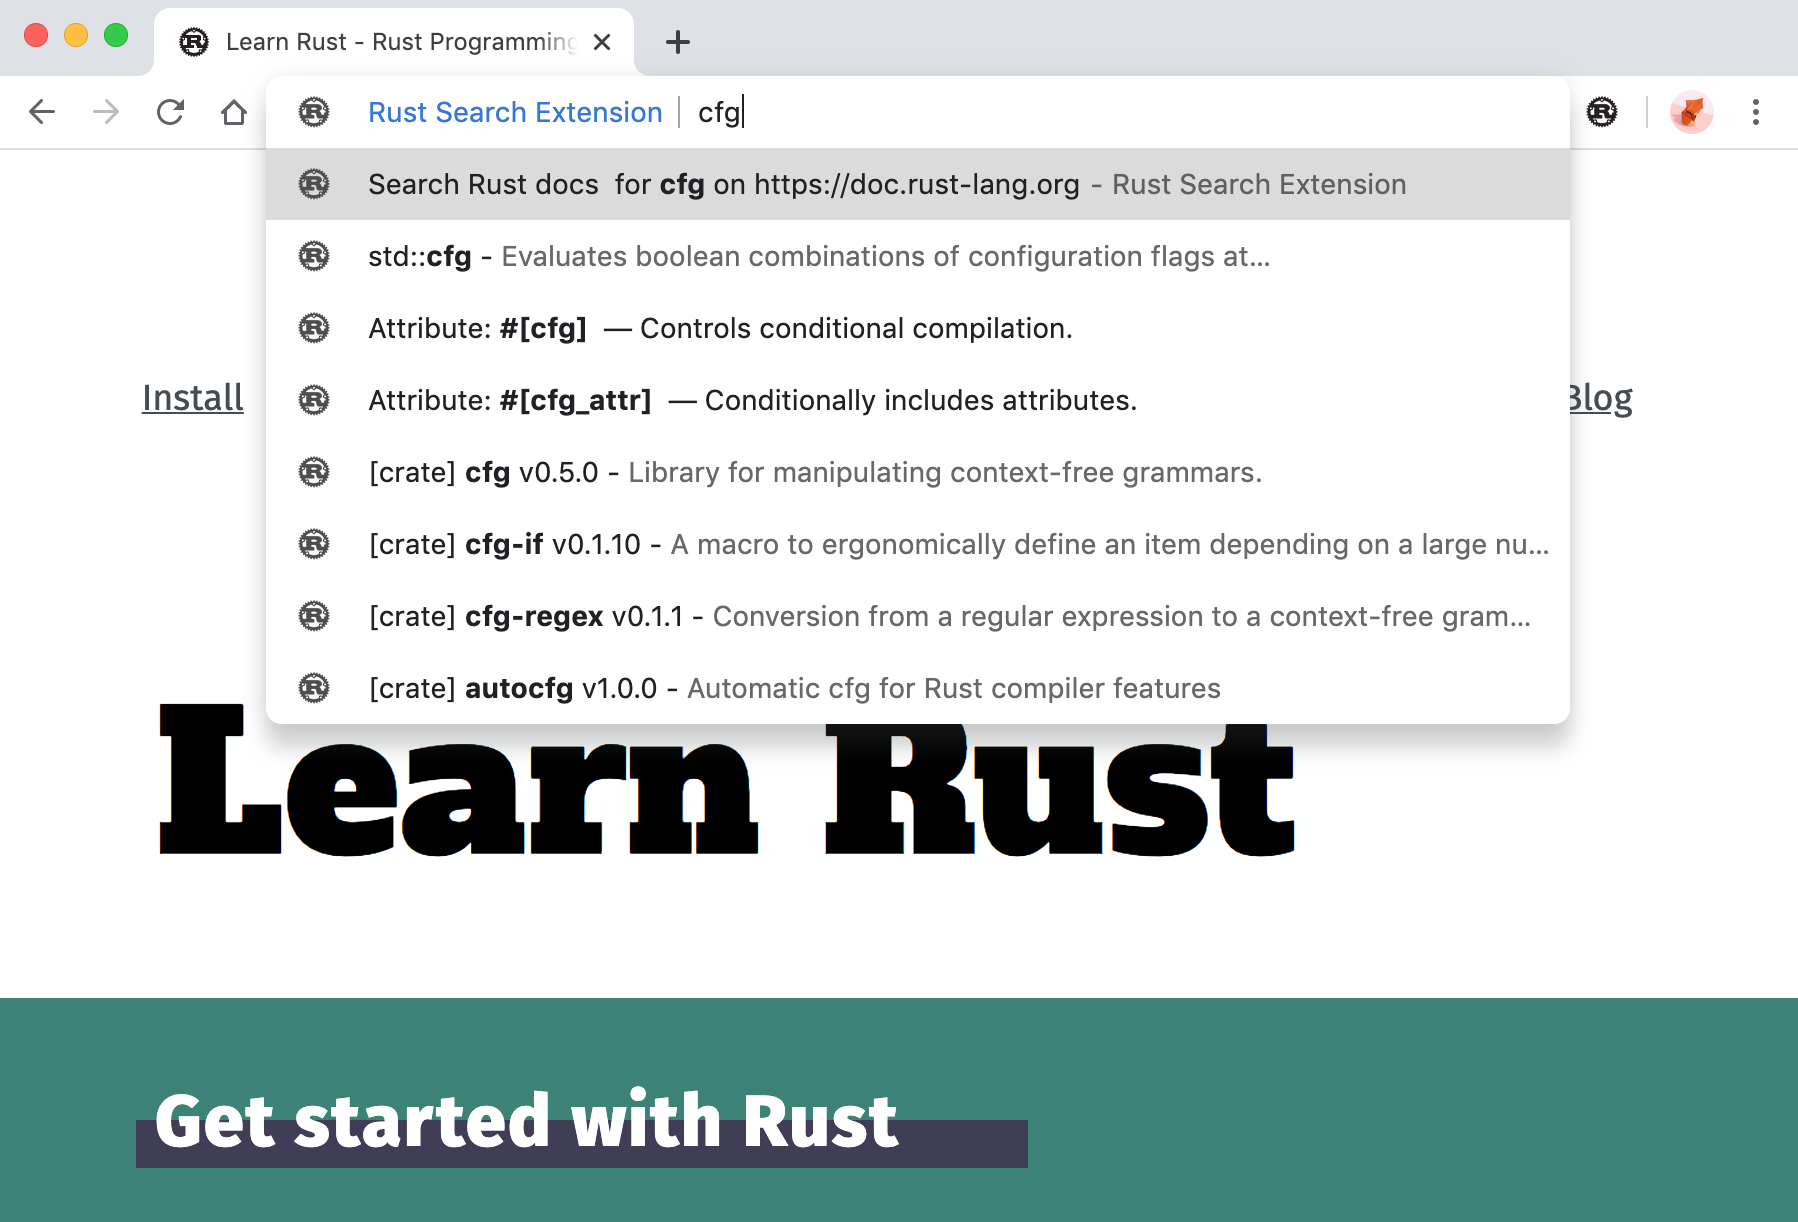 Rust Search Extension